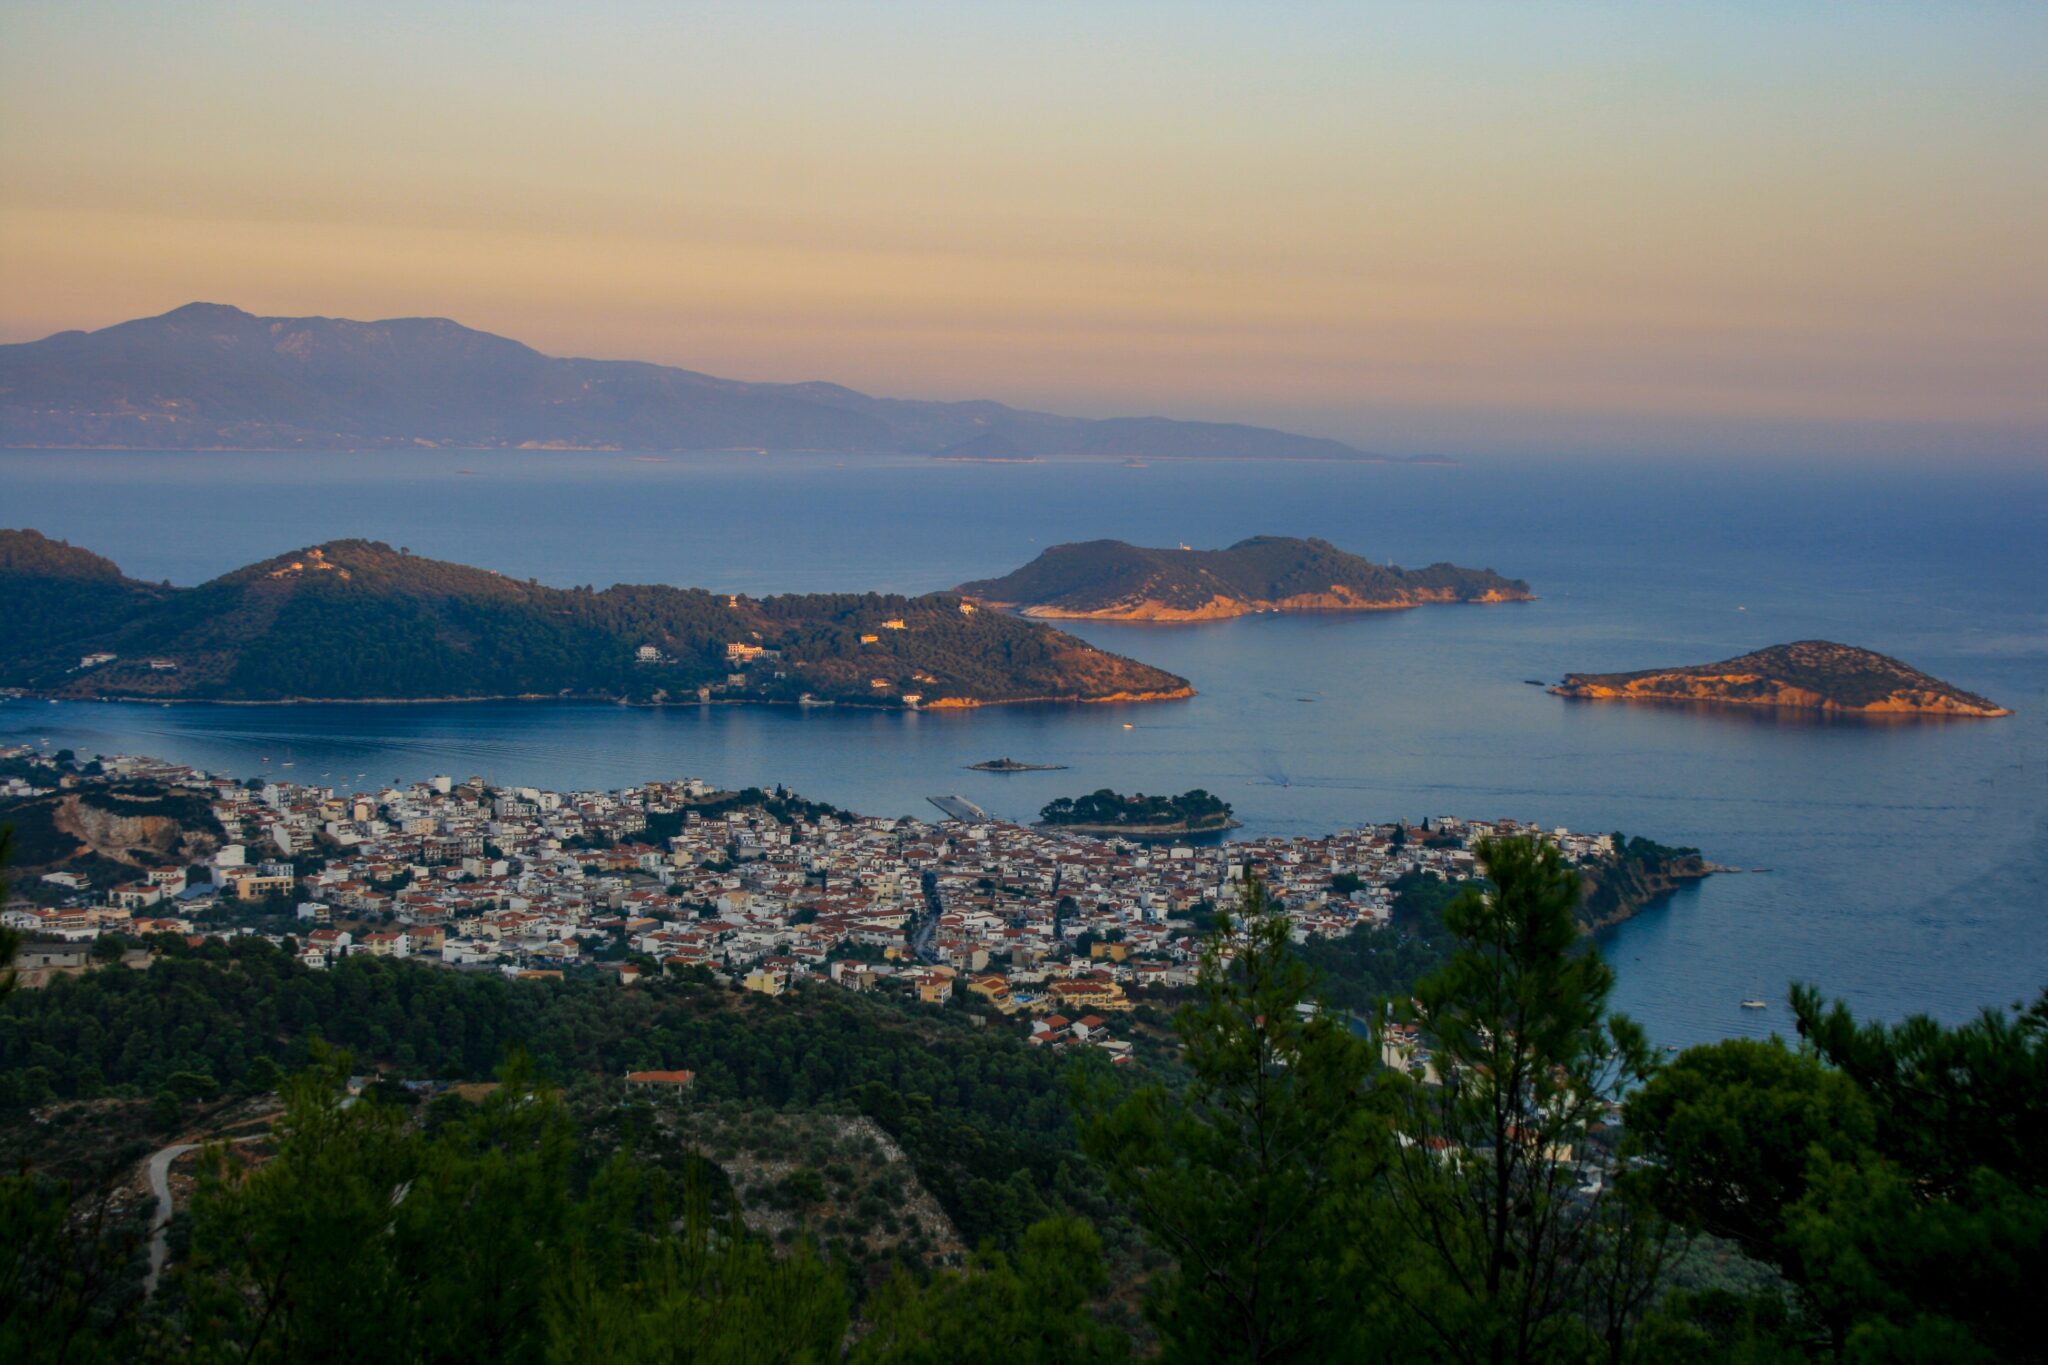 Looking down over Skiathos Town, as the sun begins to set.